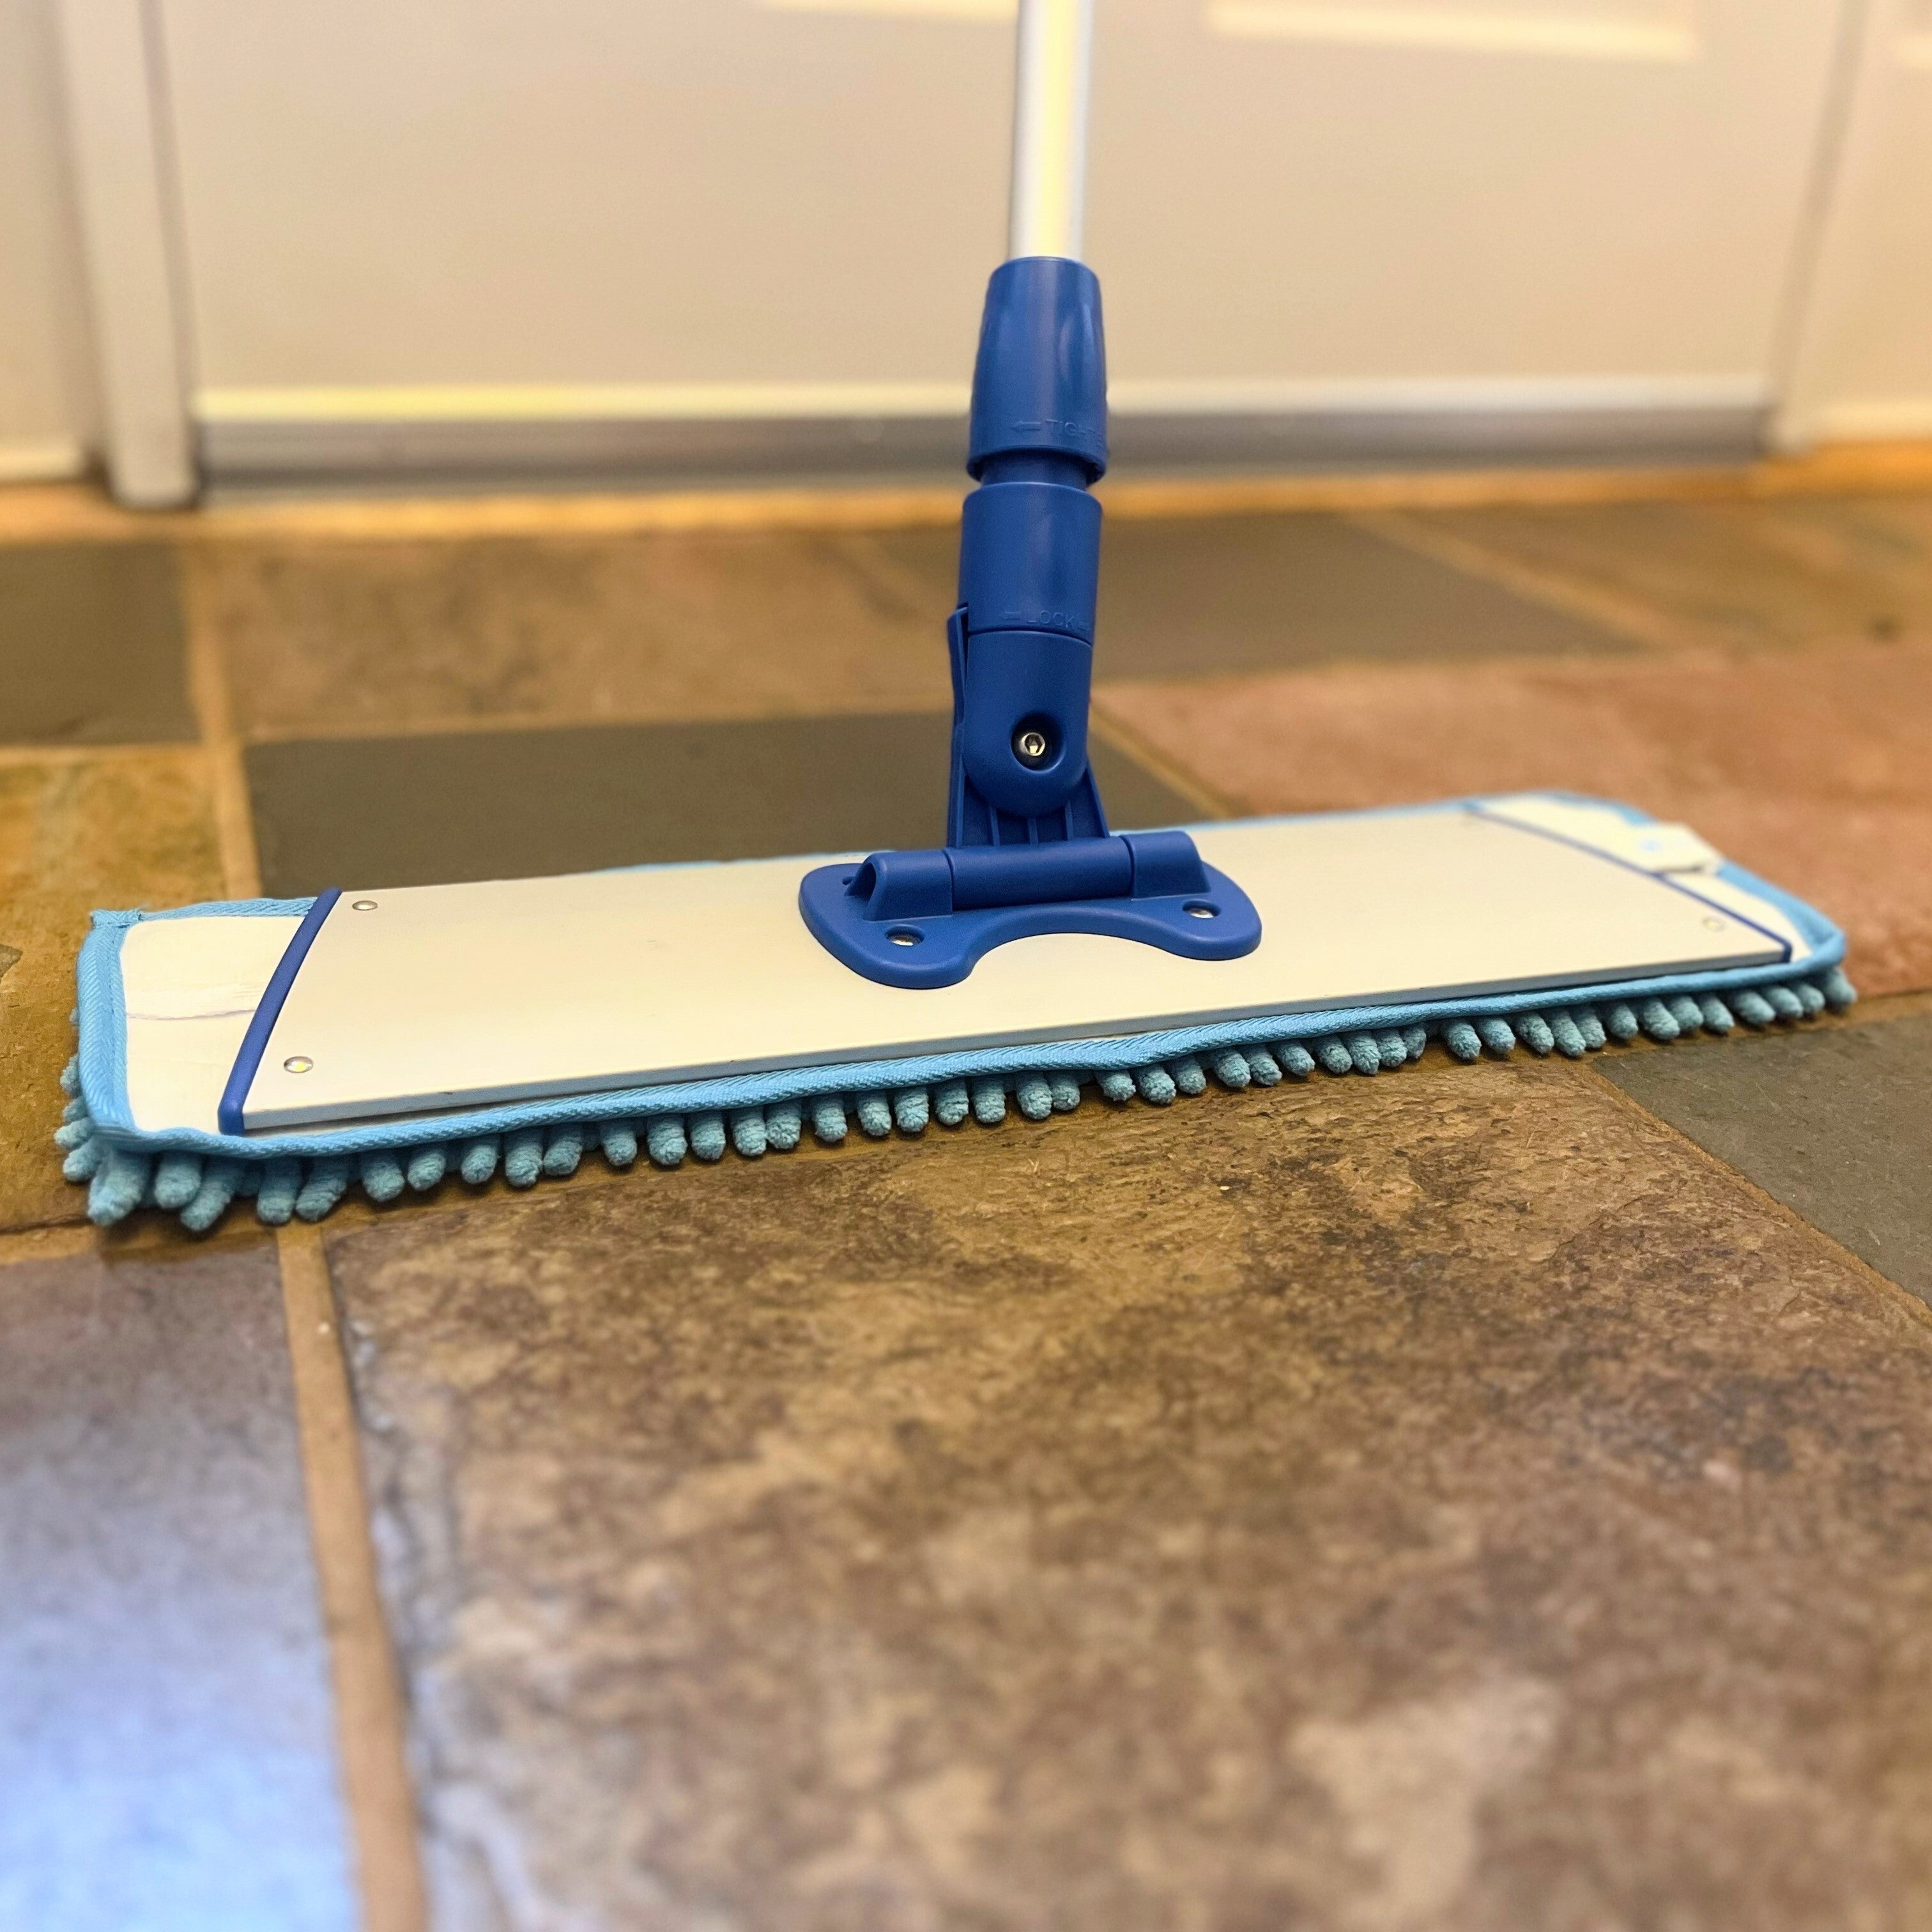 Chenille Microfiber Flat Mop Floor Cleaning Mop, Wet Dry Used Mop